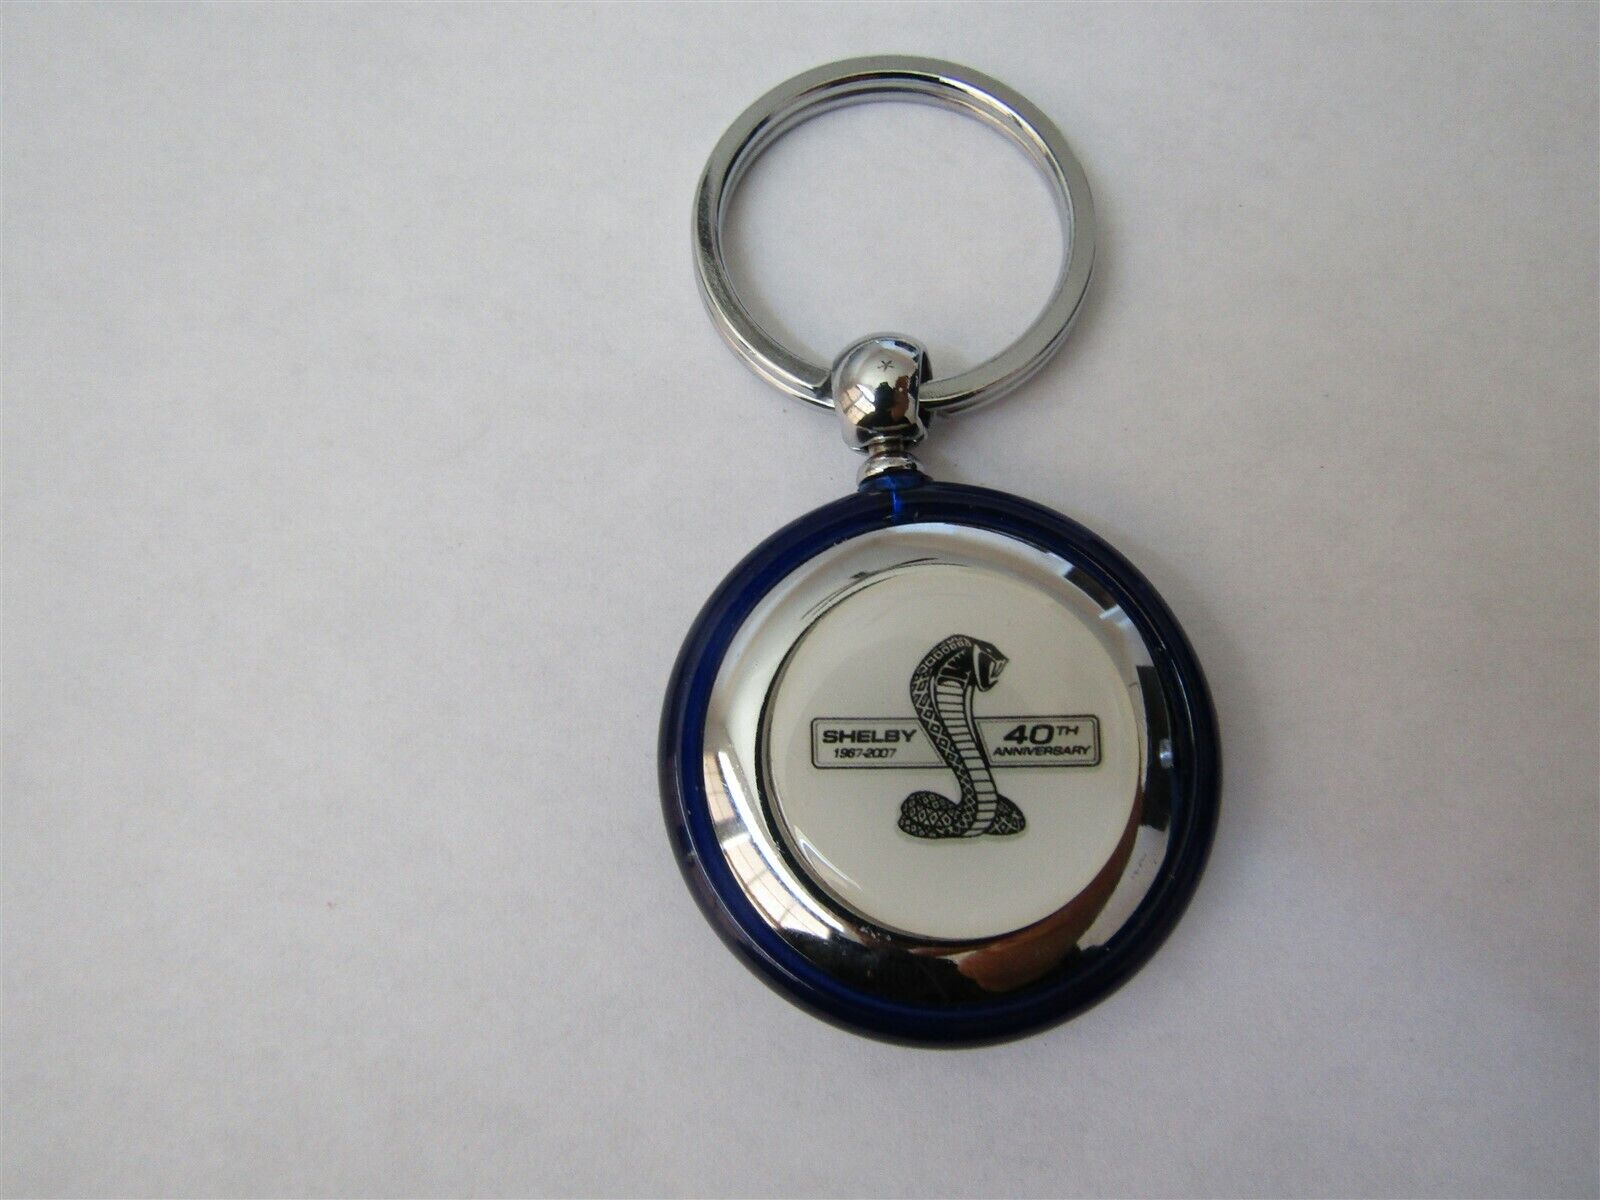 2007 SHELBY MUSTANG GT500 GT-500 40TH ANNIVERSARY KEYCHAIN KEYRING BLUE ROUND